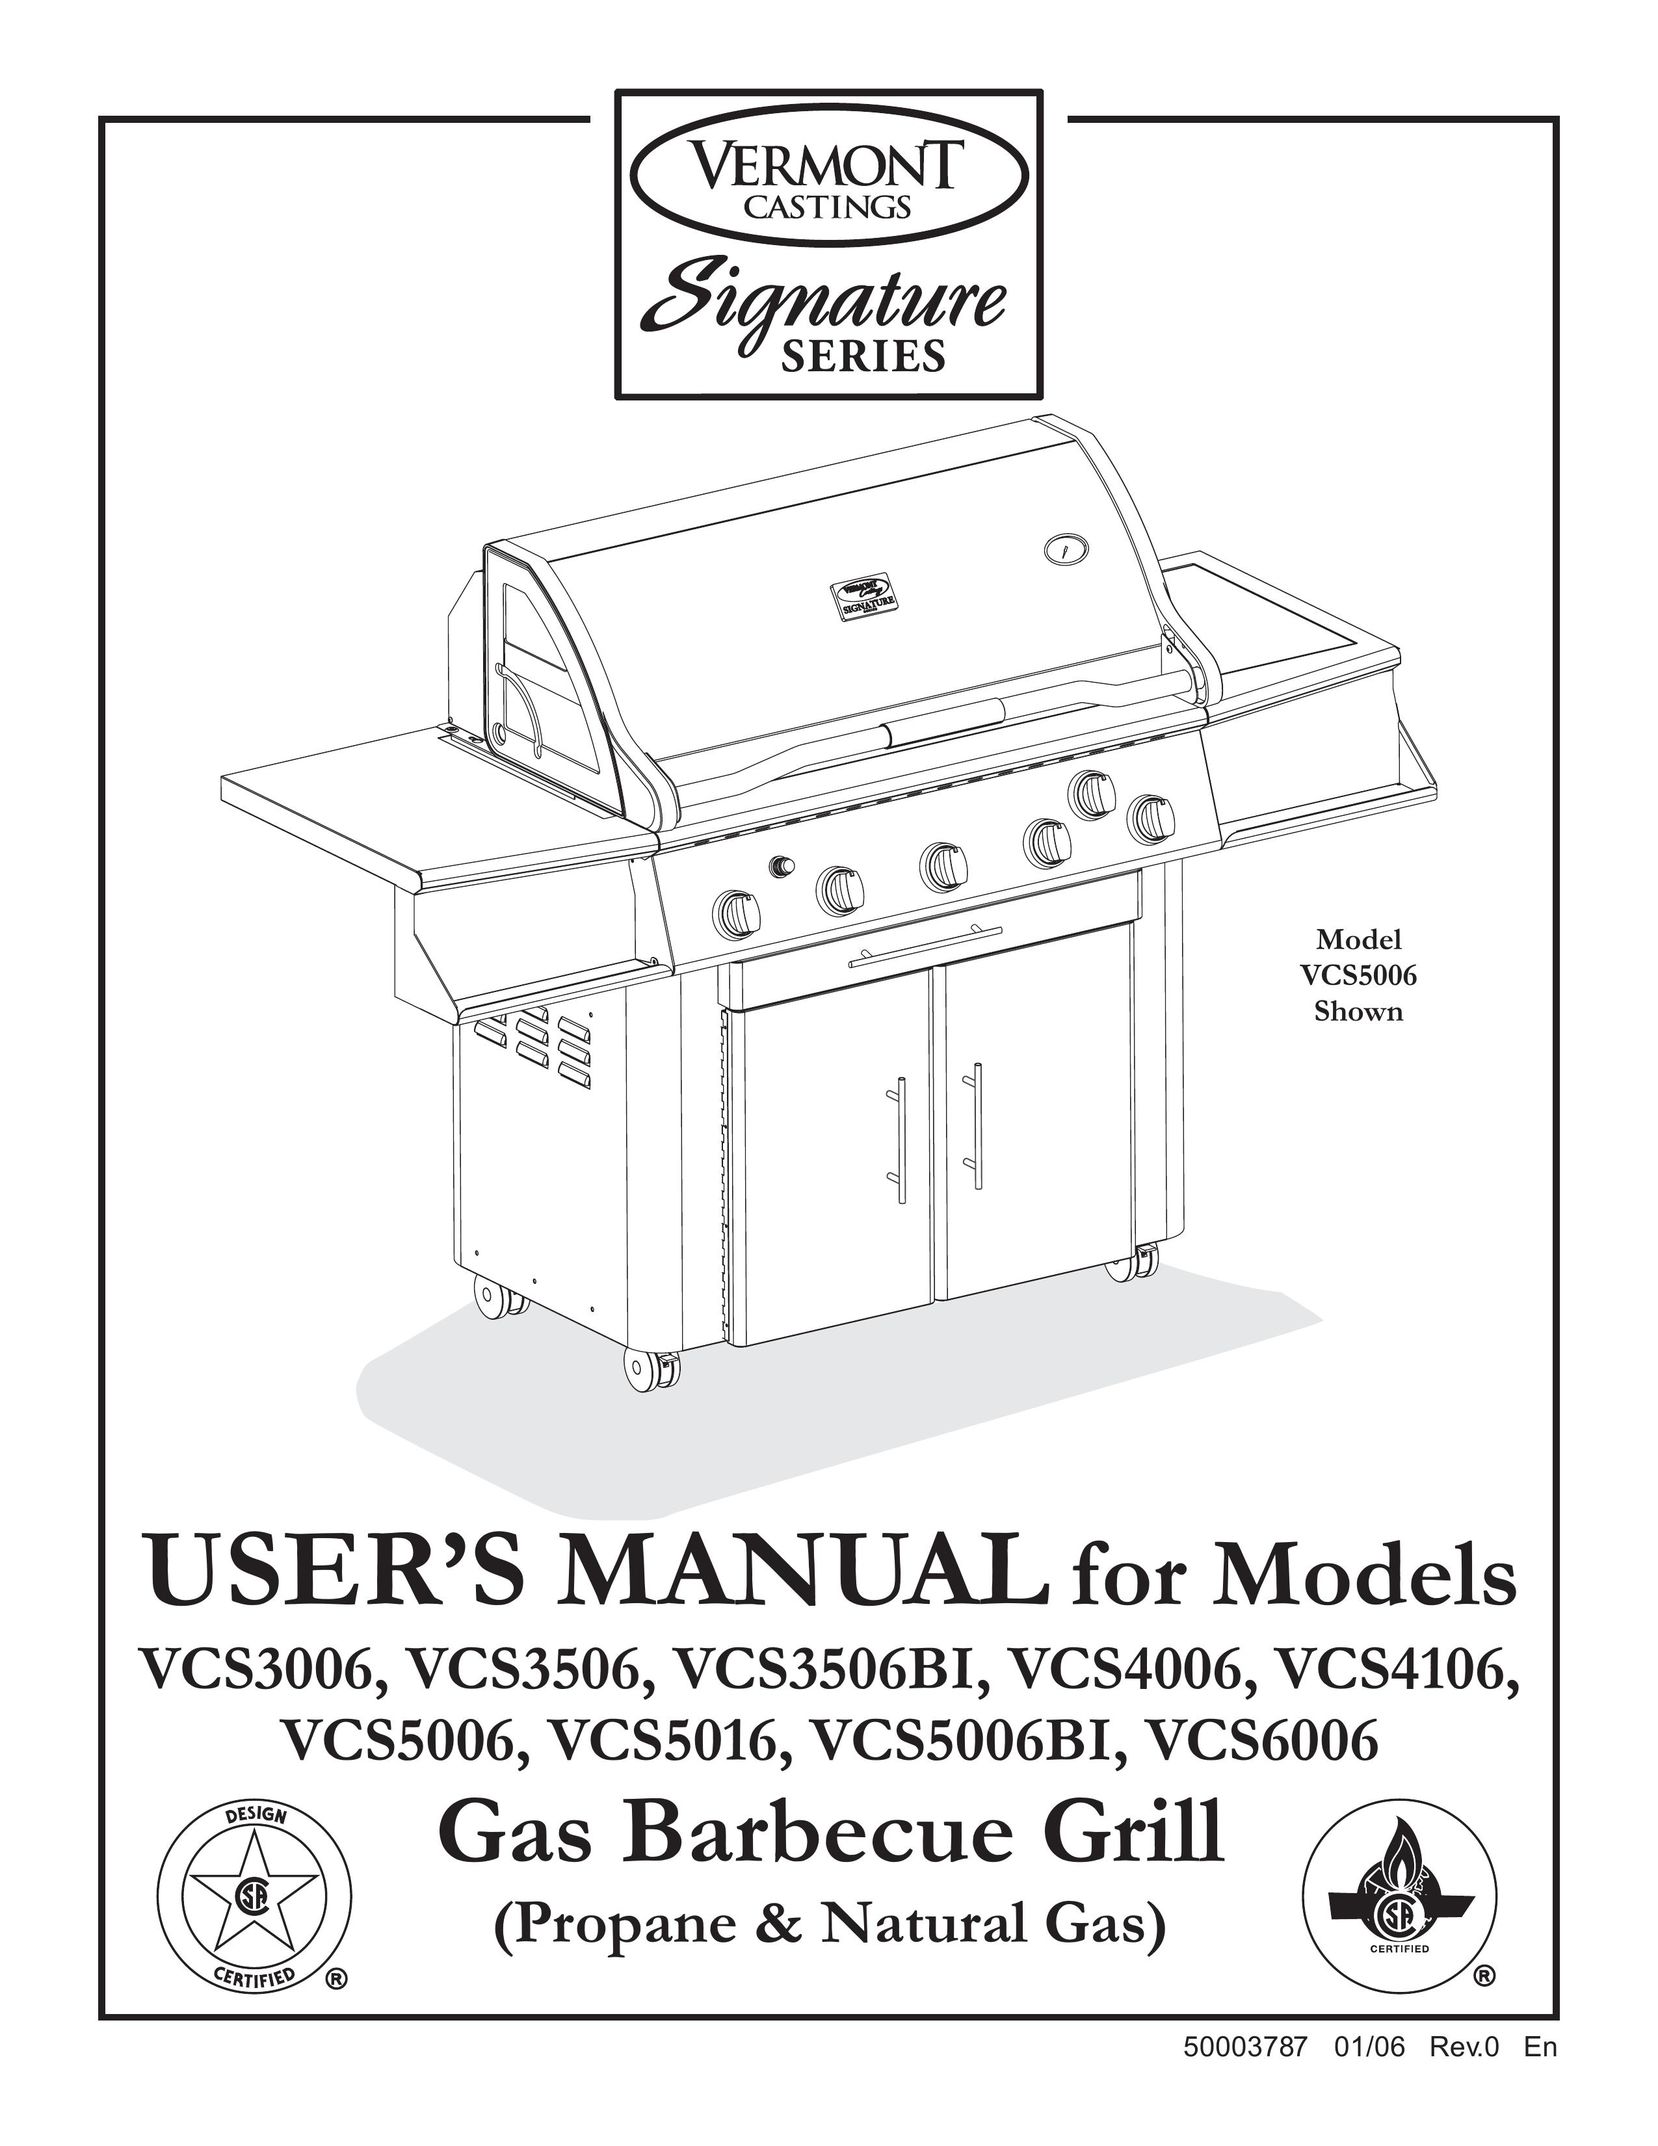 Vermont Casting VCS4106 Griddle User Manual